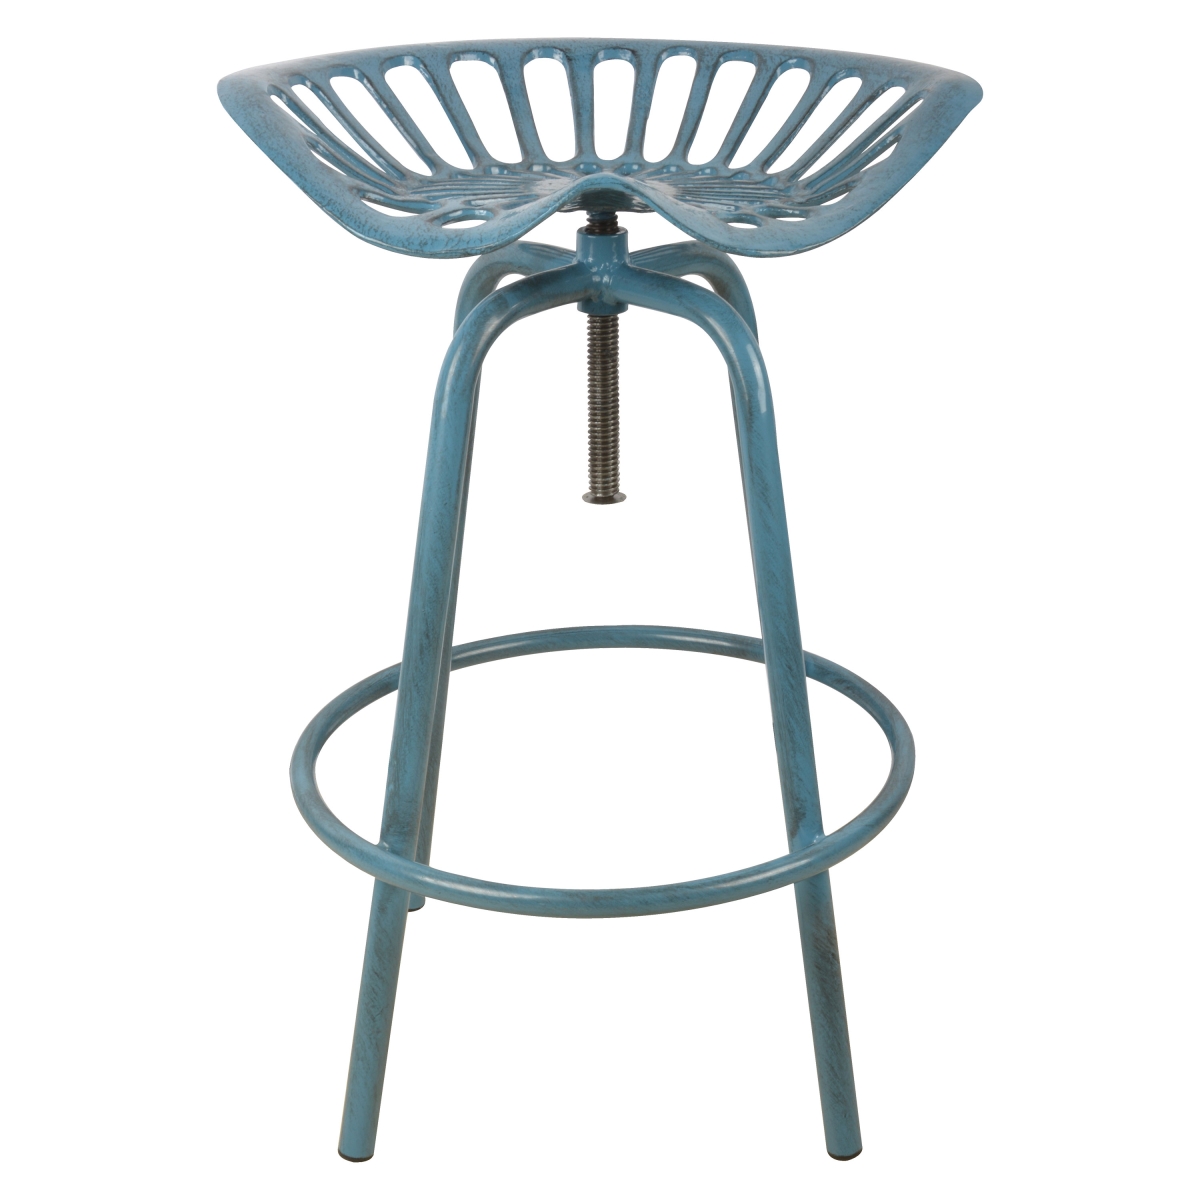 Ih034 Cast Iron & Steel Industrial Heritage Tractor Chair, Blue